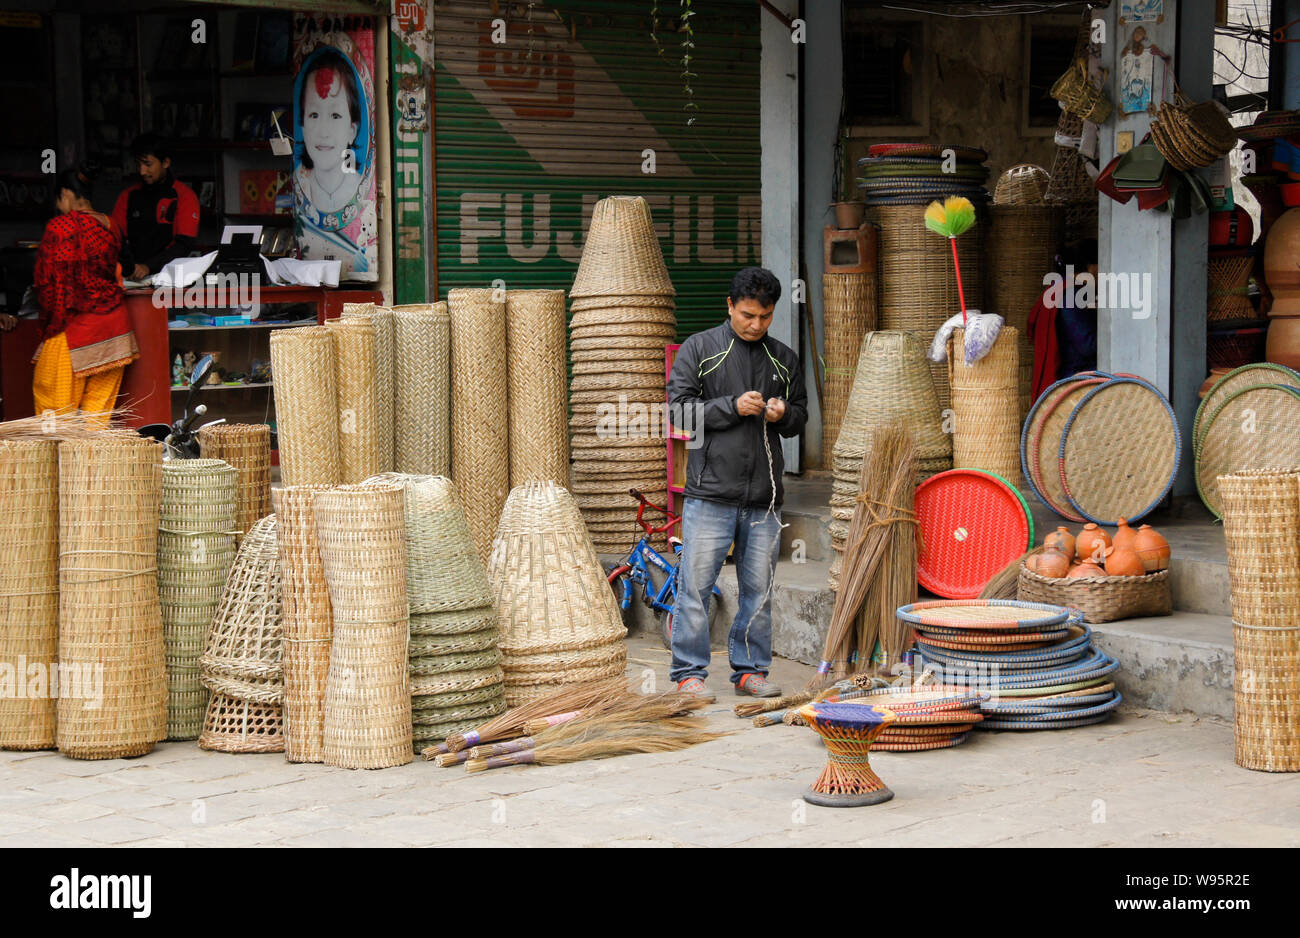 A man sells rattan products outside a shop in the Old Bazaar area of Pokhara, Nepal Stock Photo